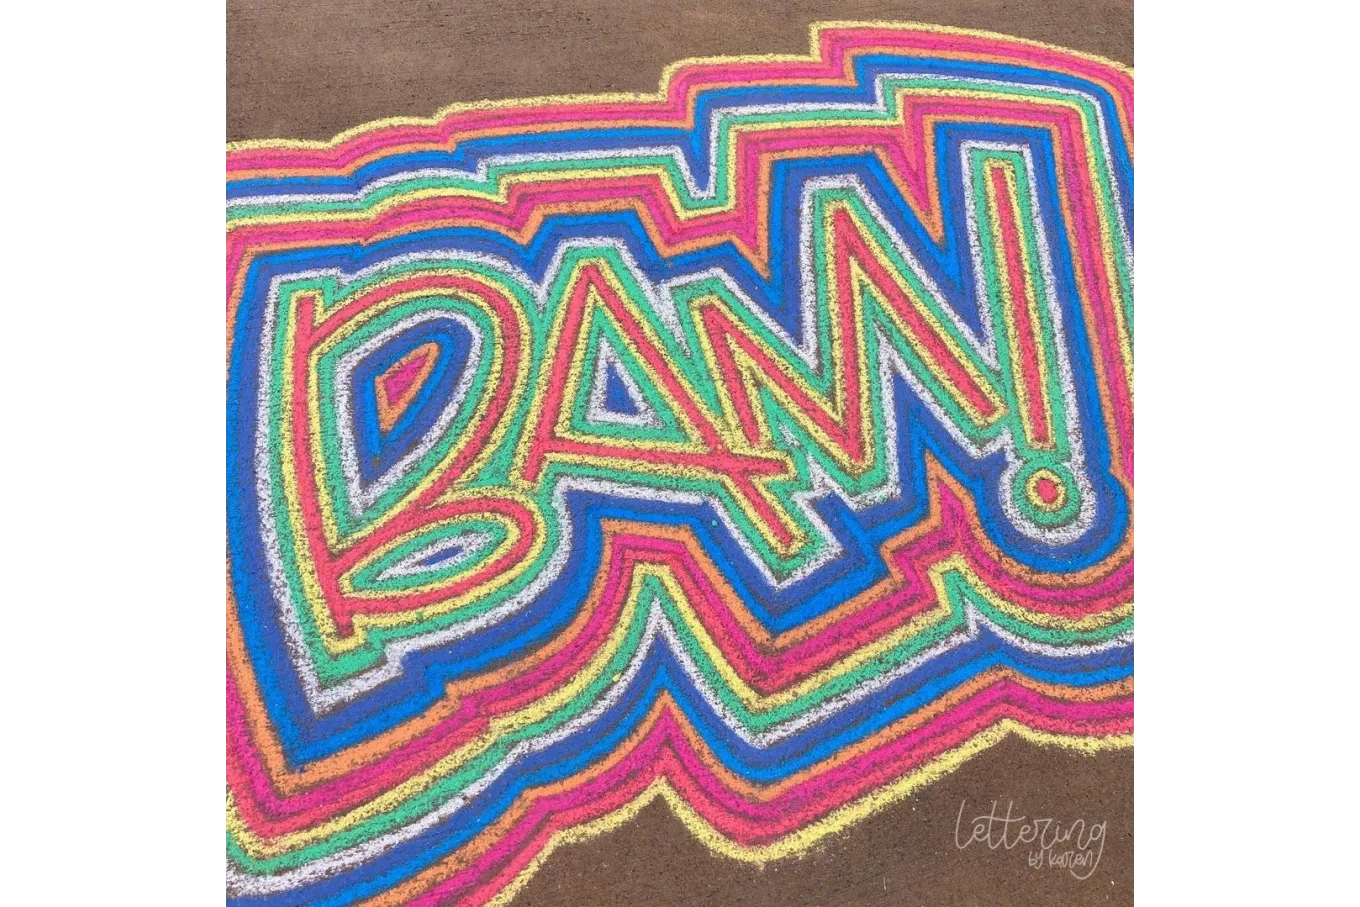 Chalk art that reads "BAM!" in red, yellow, blue, and green